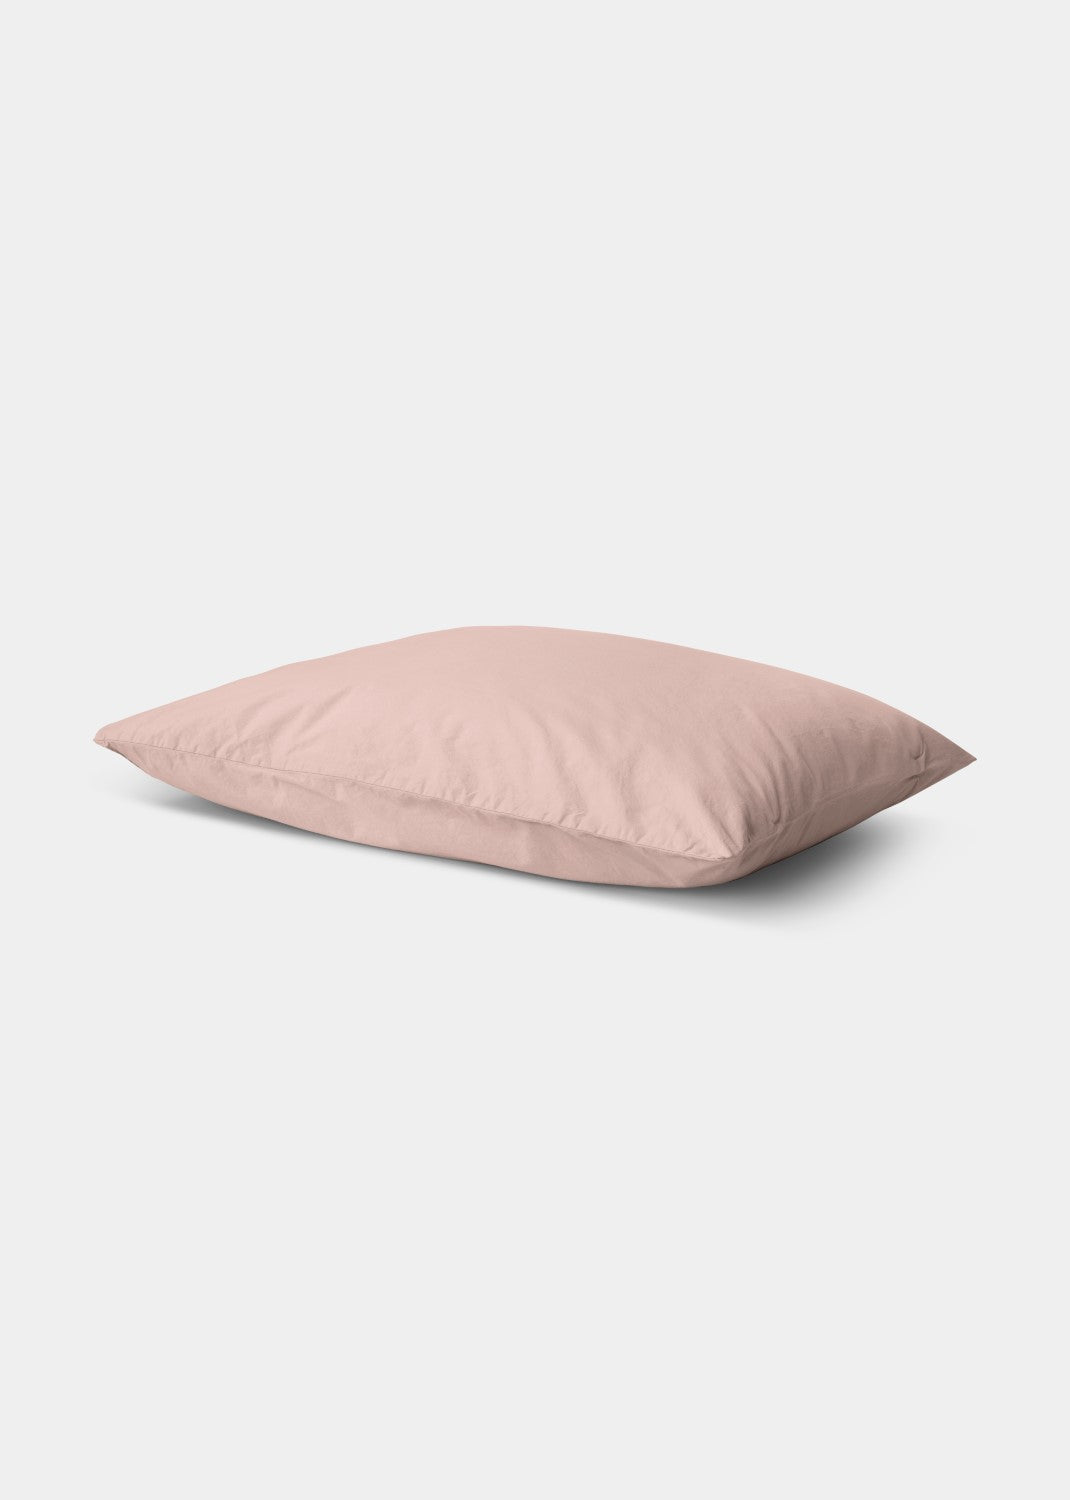 Cotton percale bed set - Pink